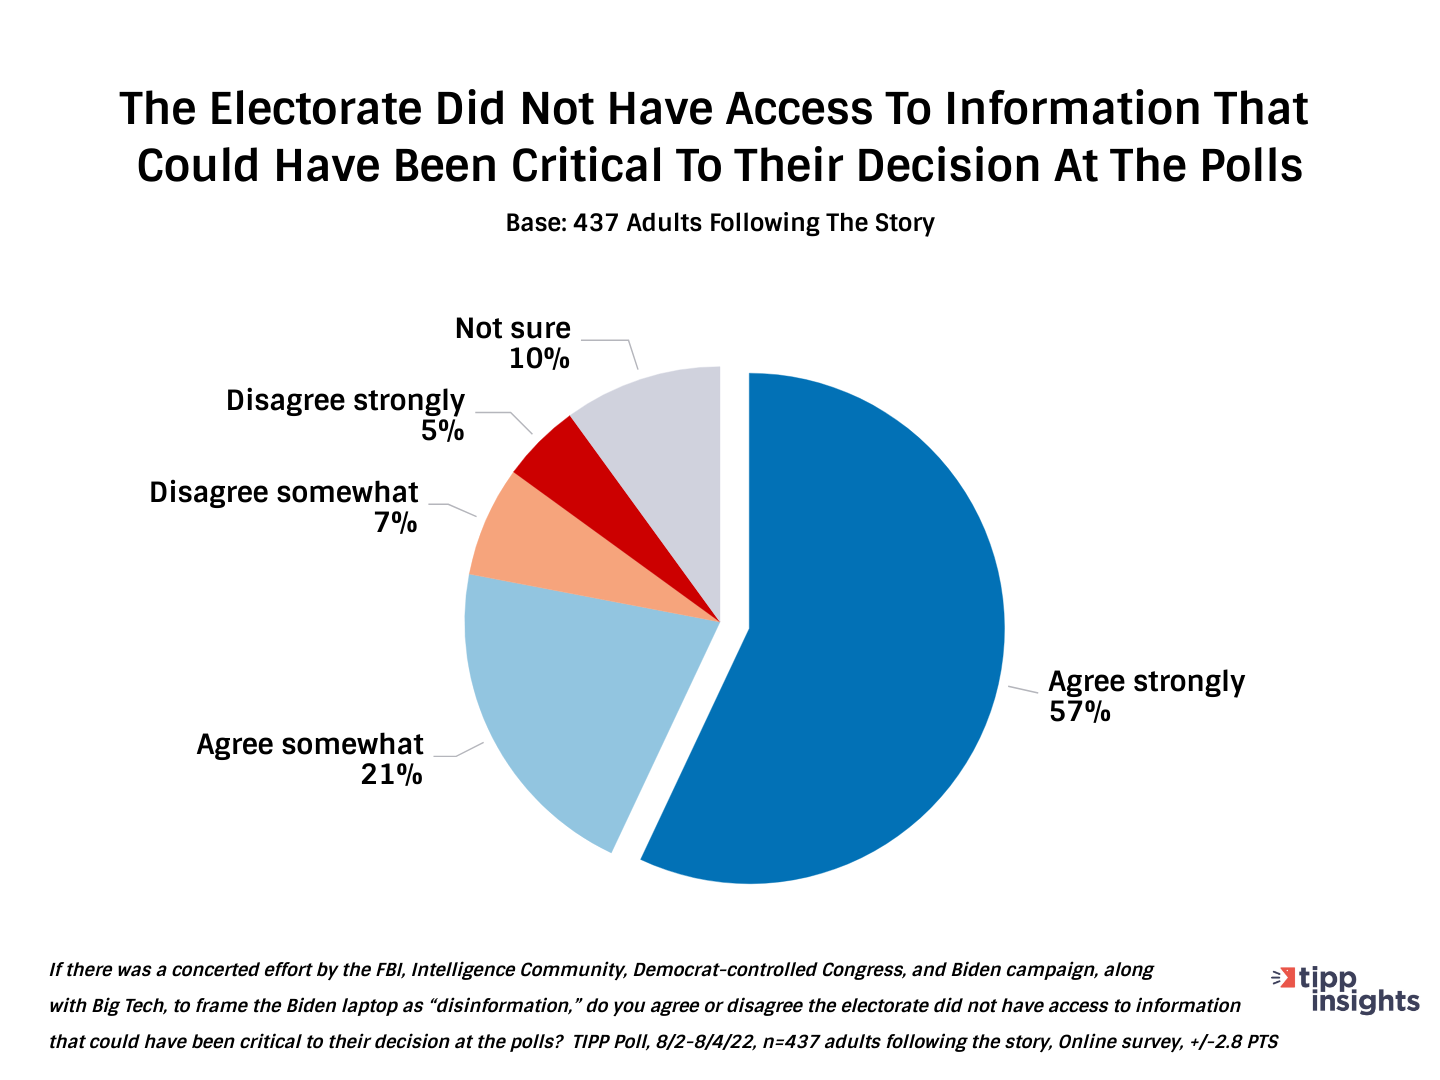 TIPP Poll Results: The American public did not have access to information that could have been critical to who they voted for